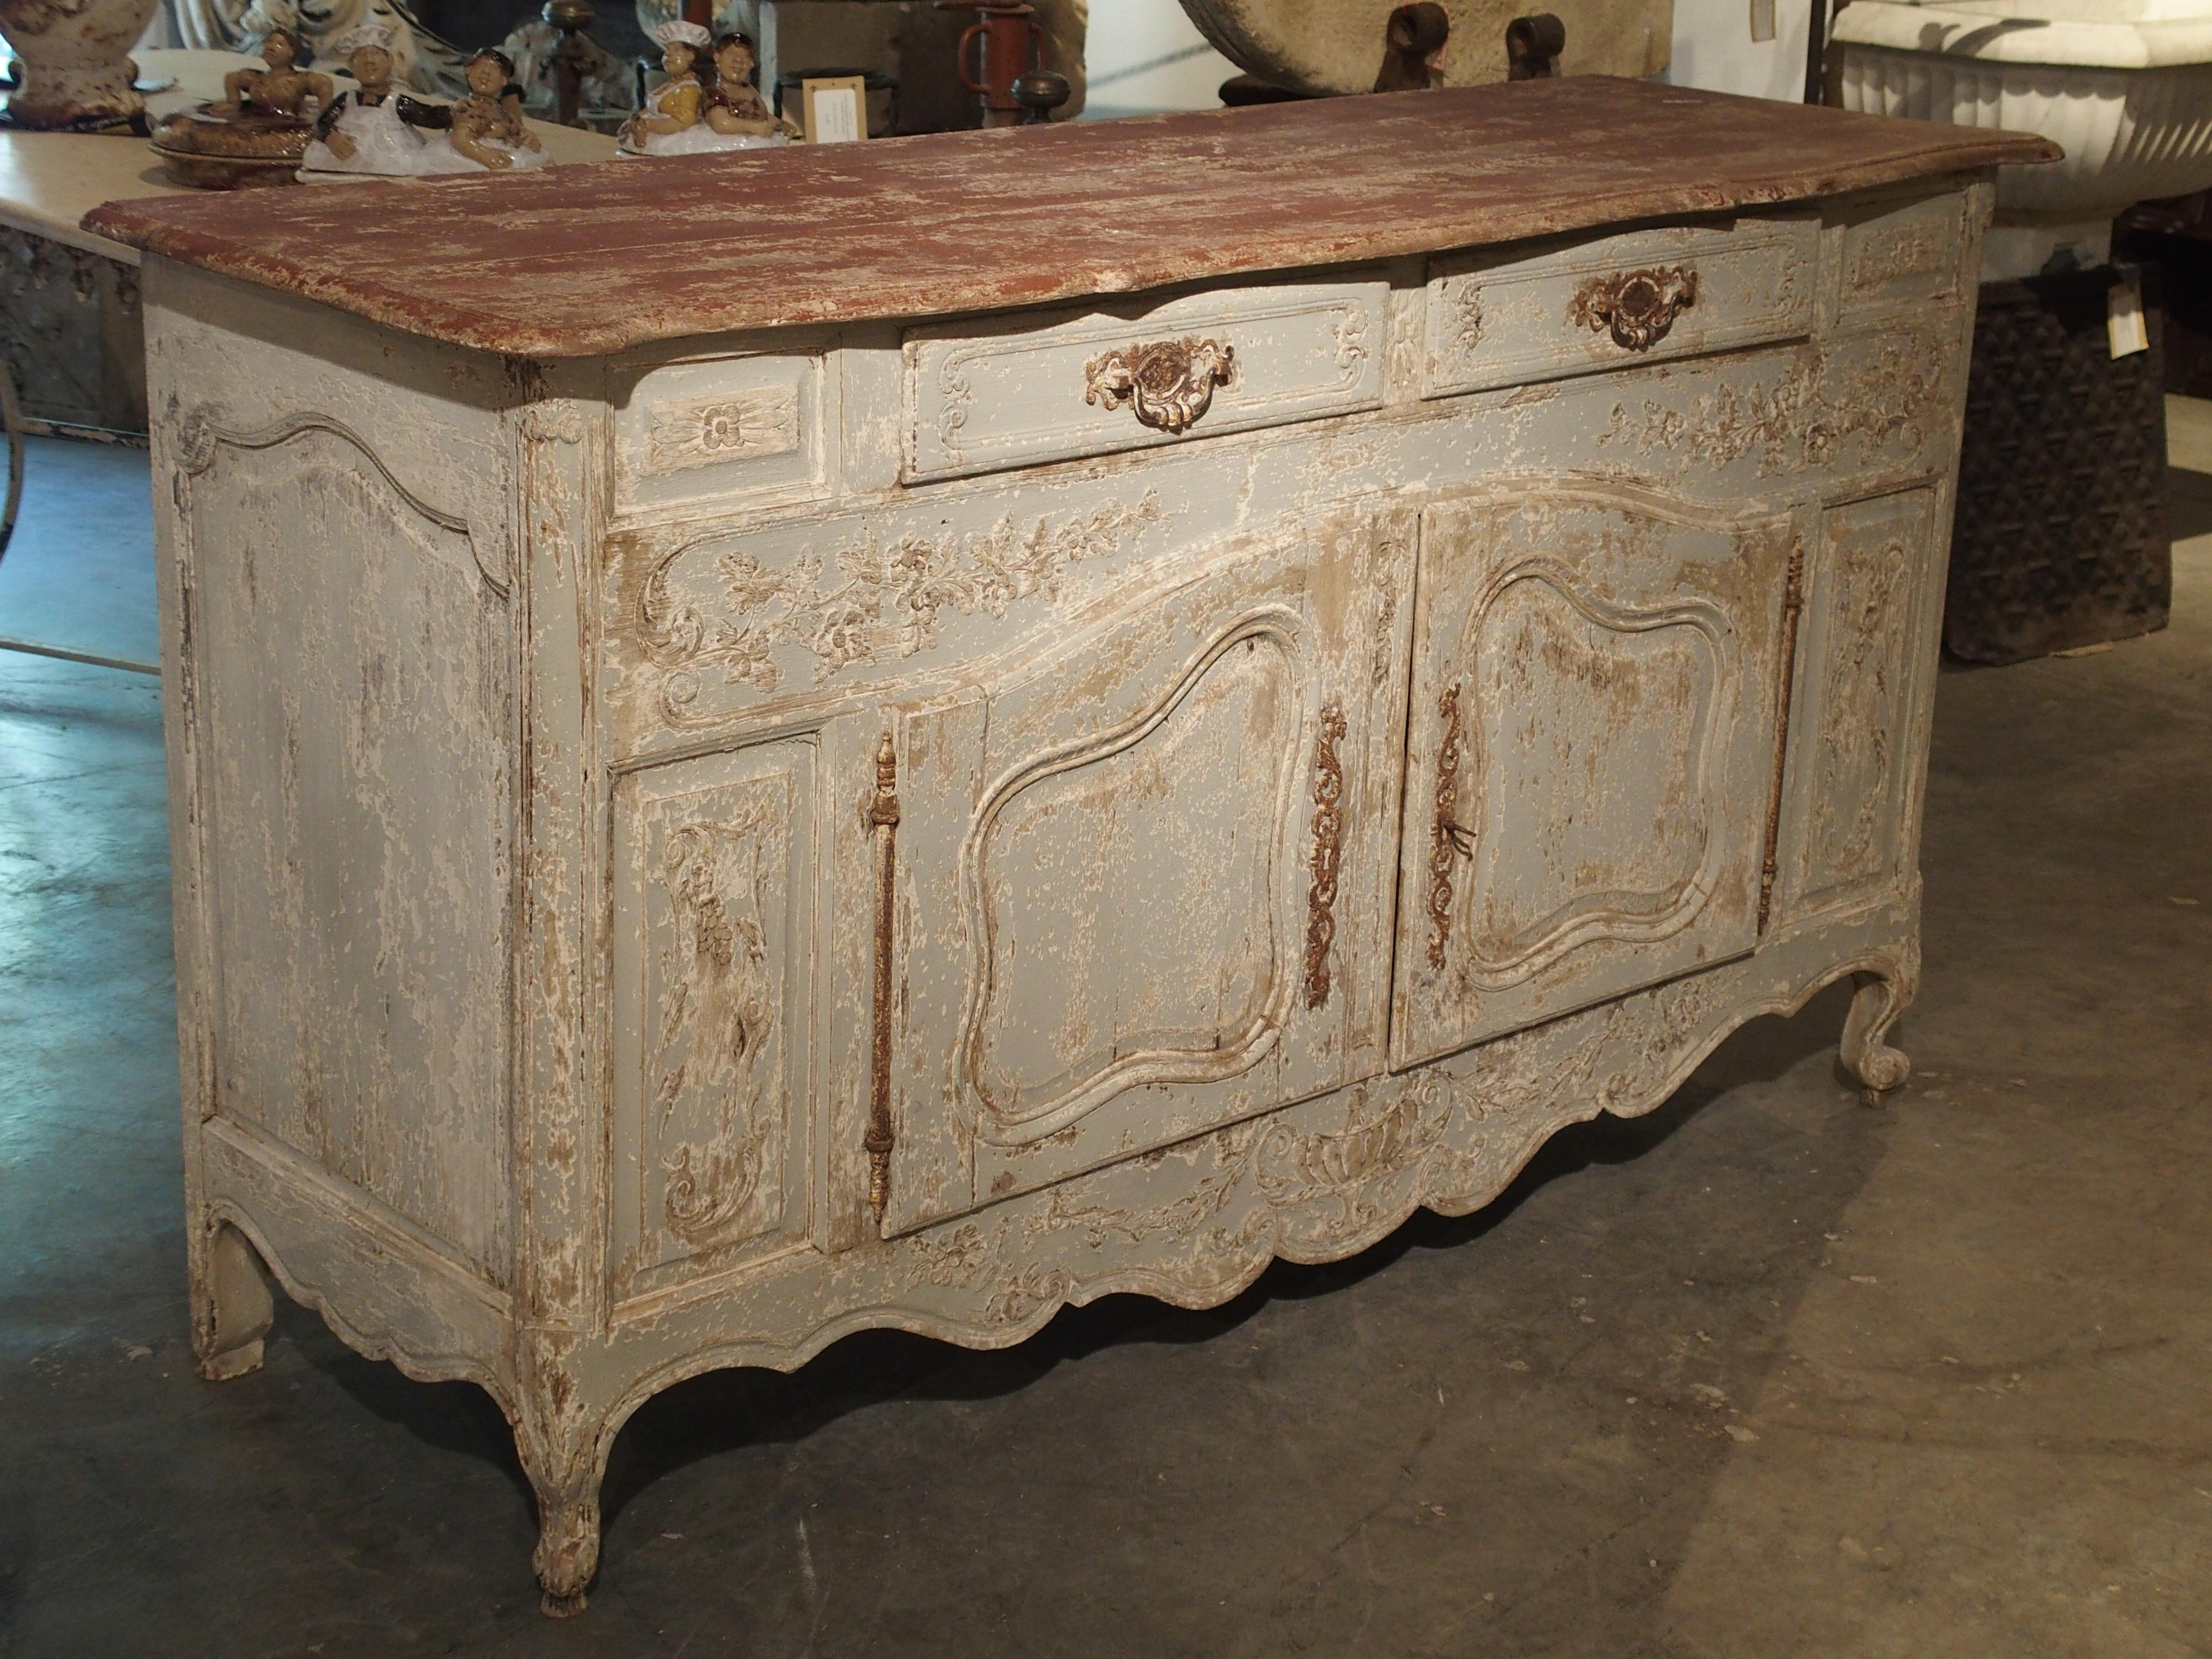 From Provence, this wonderful pale blue buffet has a brick red wooden top. There is a scalloped top with two center drawers directly beneath this. Two faux panels are on either side of the drawers. The floral and foliate frieze beneath has two doors